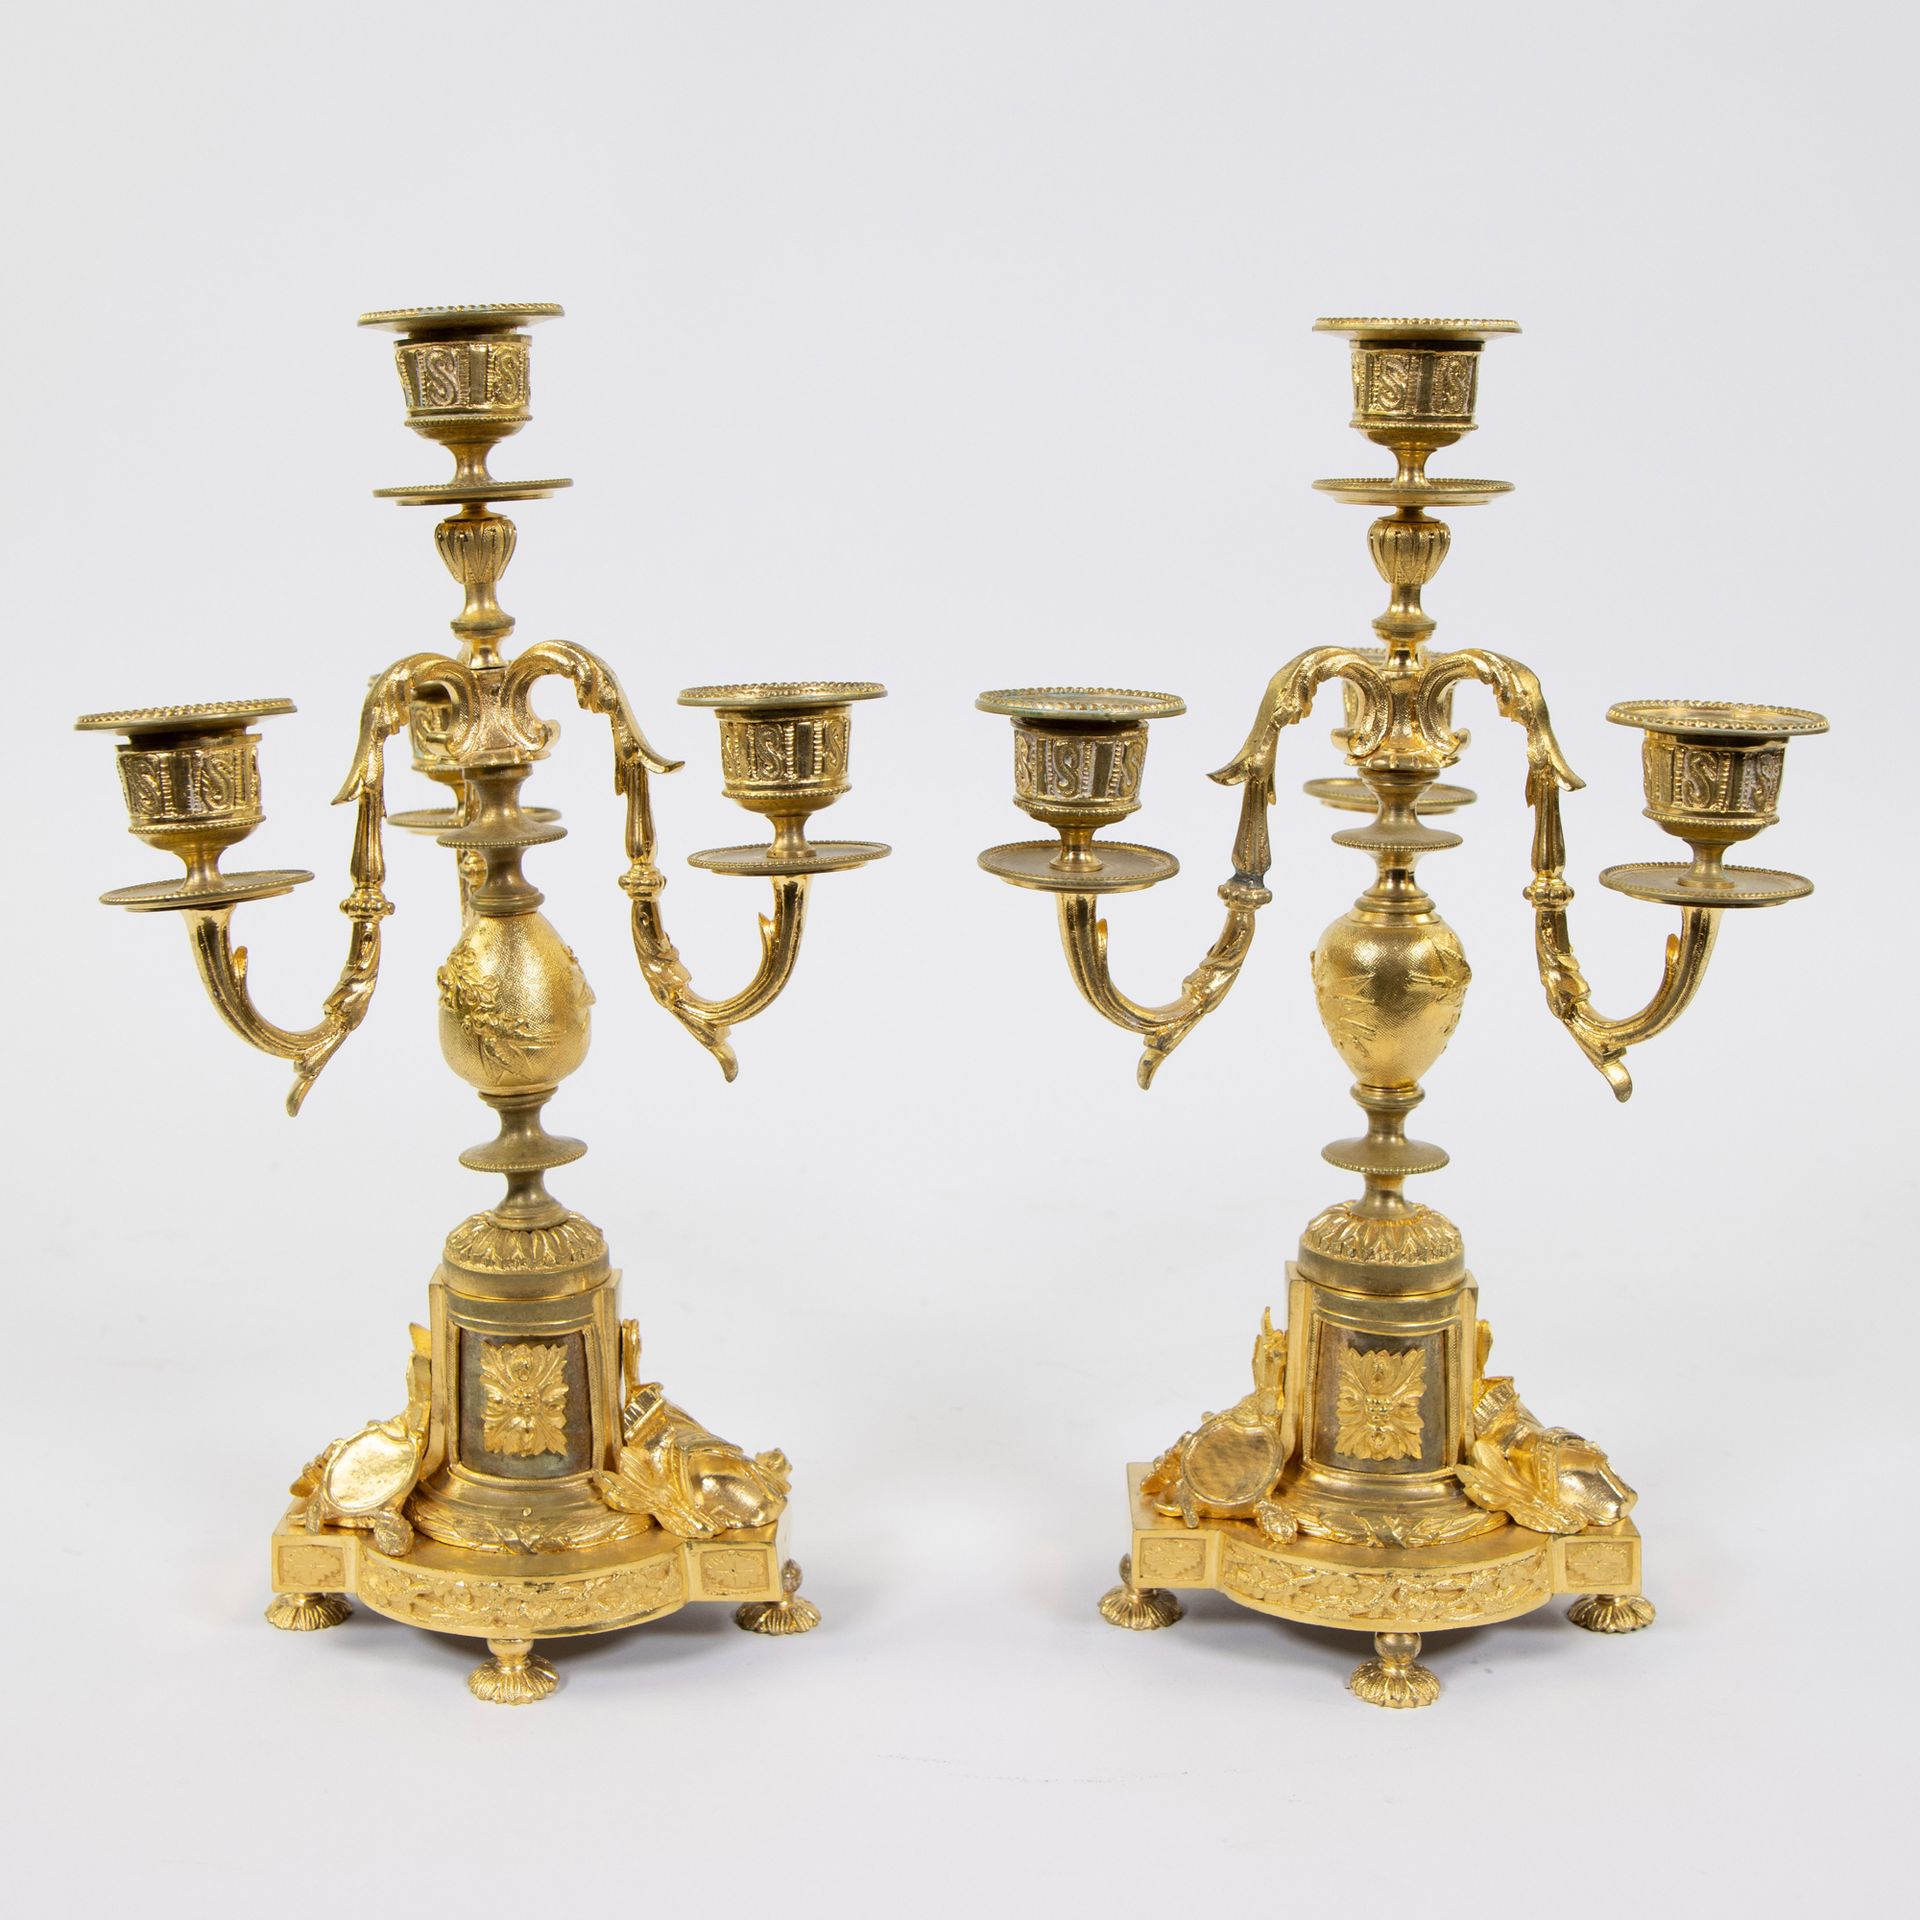 Null Lot of 2 fire gilt candlesticks, French, 19th century
Lot van 2 vuurverguld&hellip;